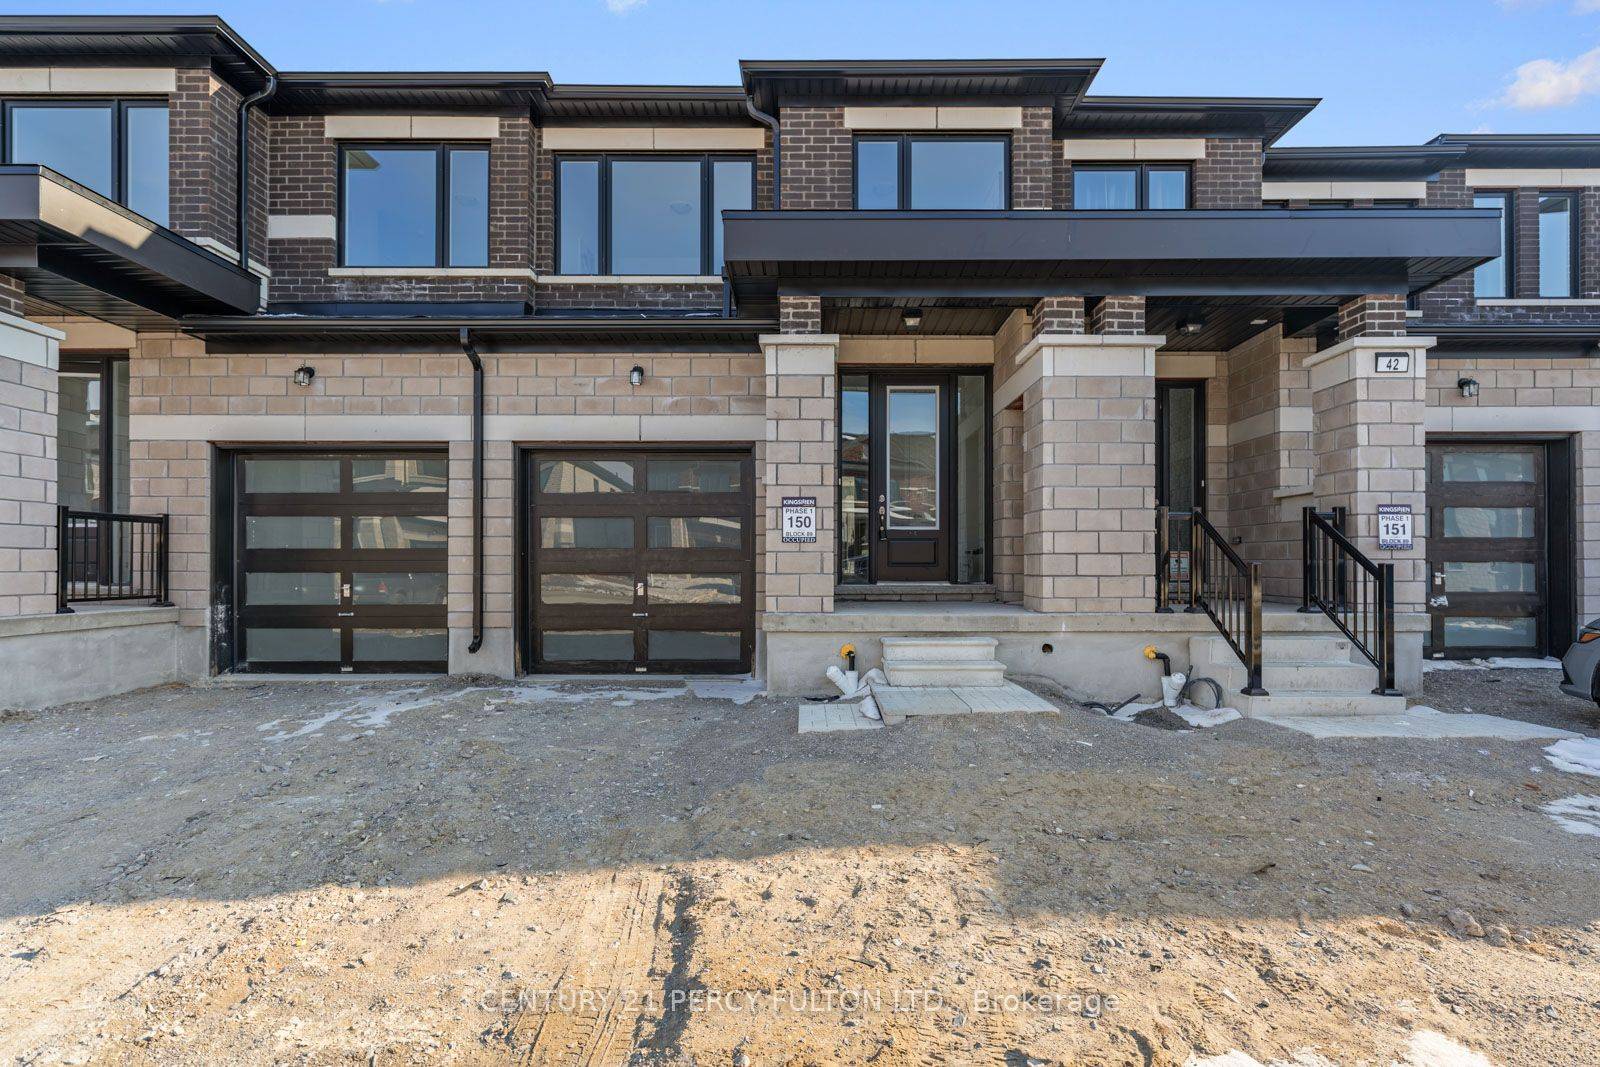 This Stunning, Spacious, And Bright Brand New 3 Bedroom, 3 Bath Townhouse Is Conveniently Situated In The Desired New Community Of Central Lindsay.